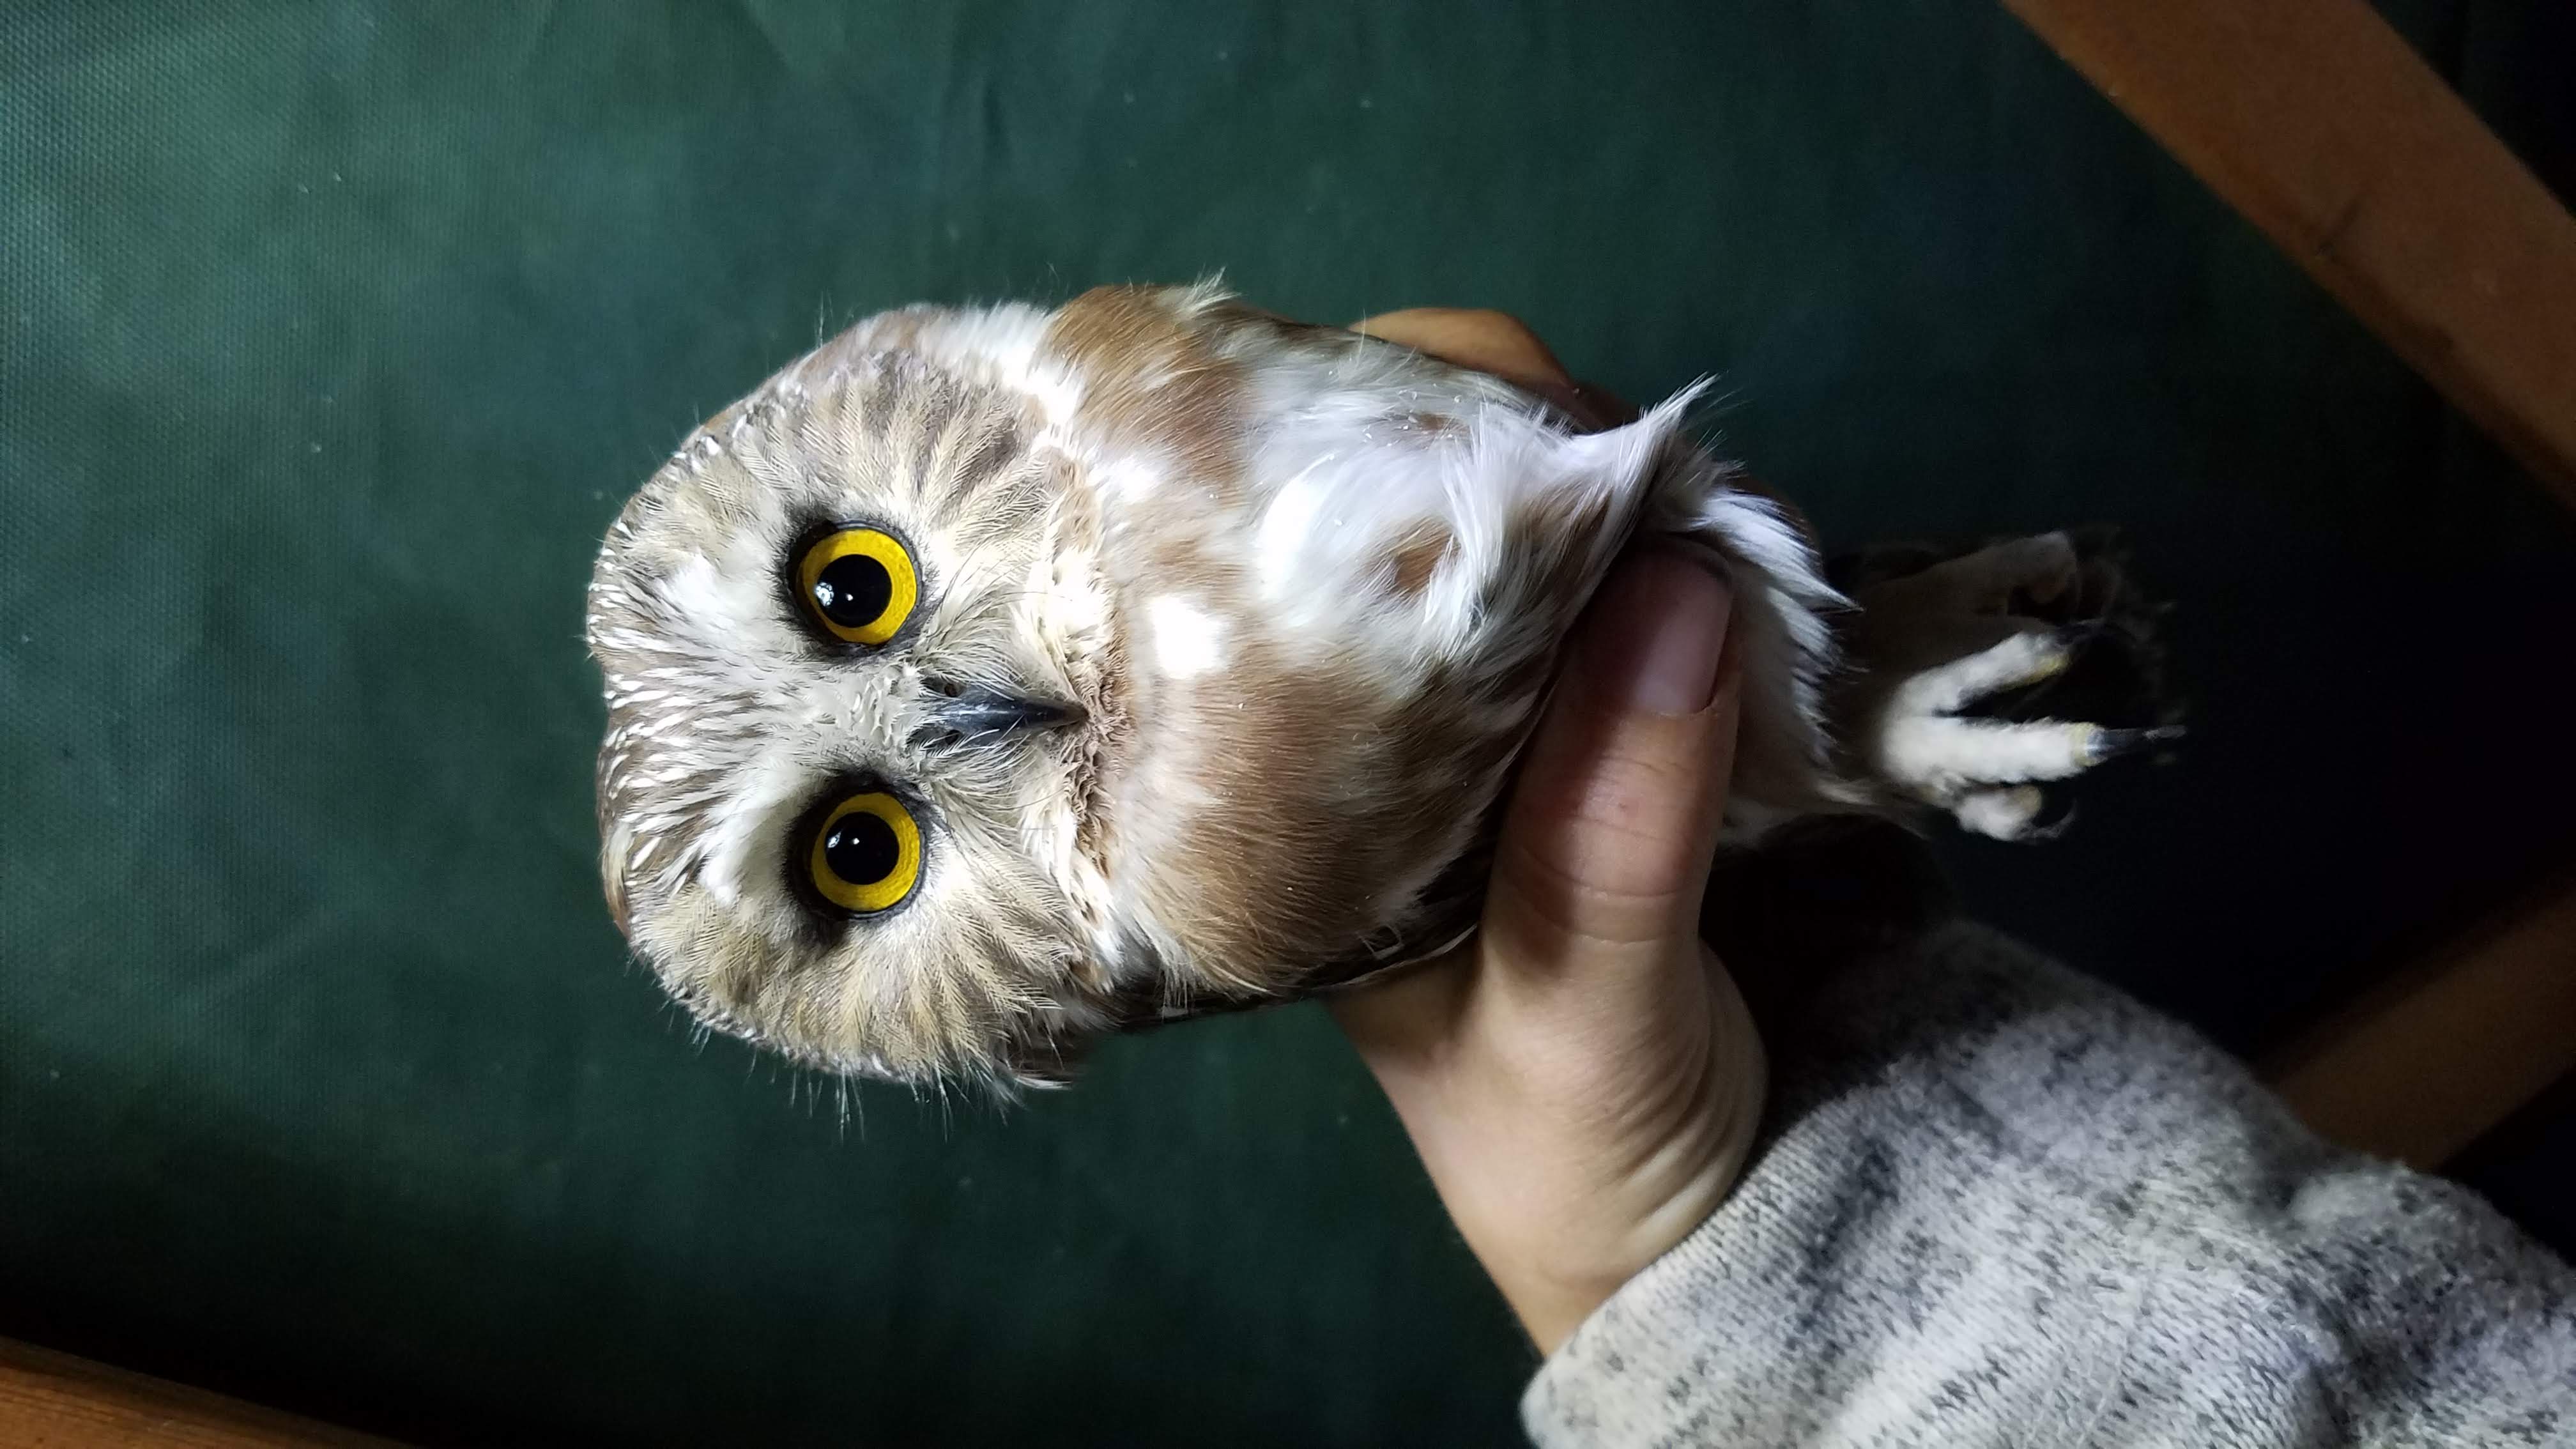 a small owl with bright yellow eyes looks at the camera. Held gently by a biologist's hand